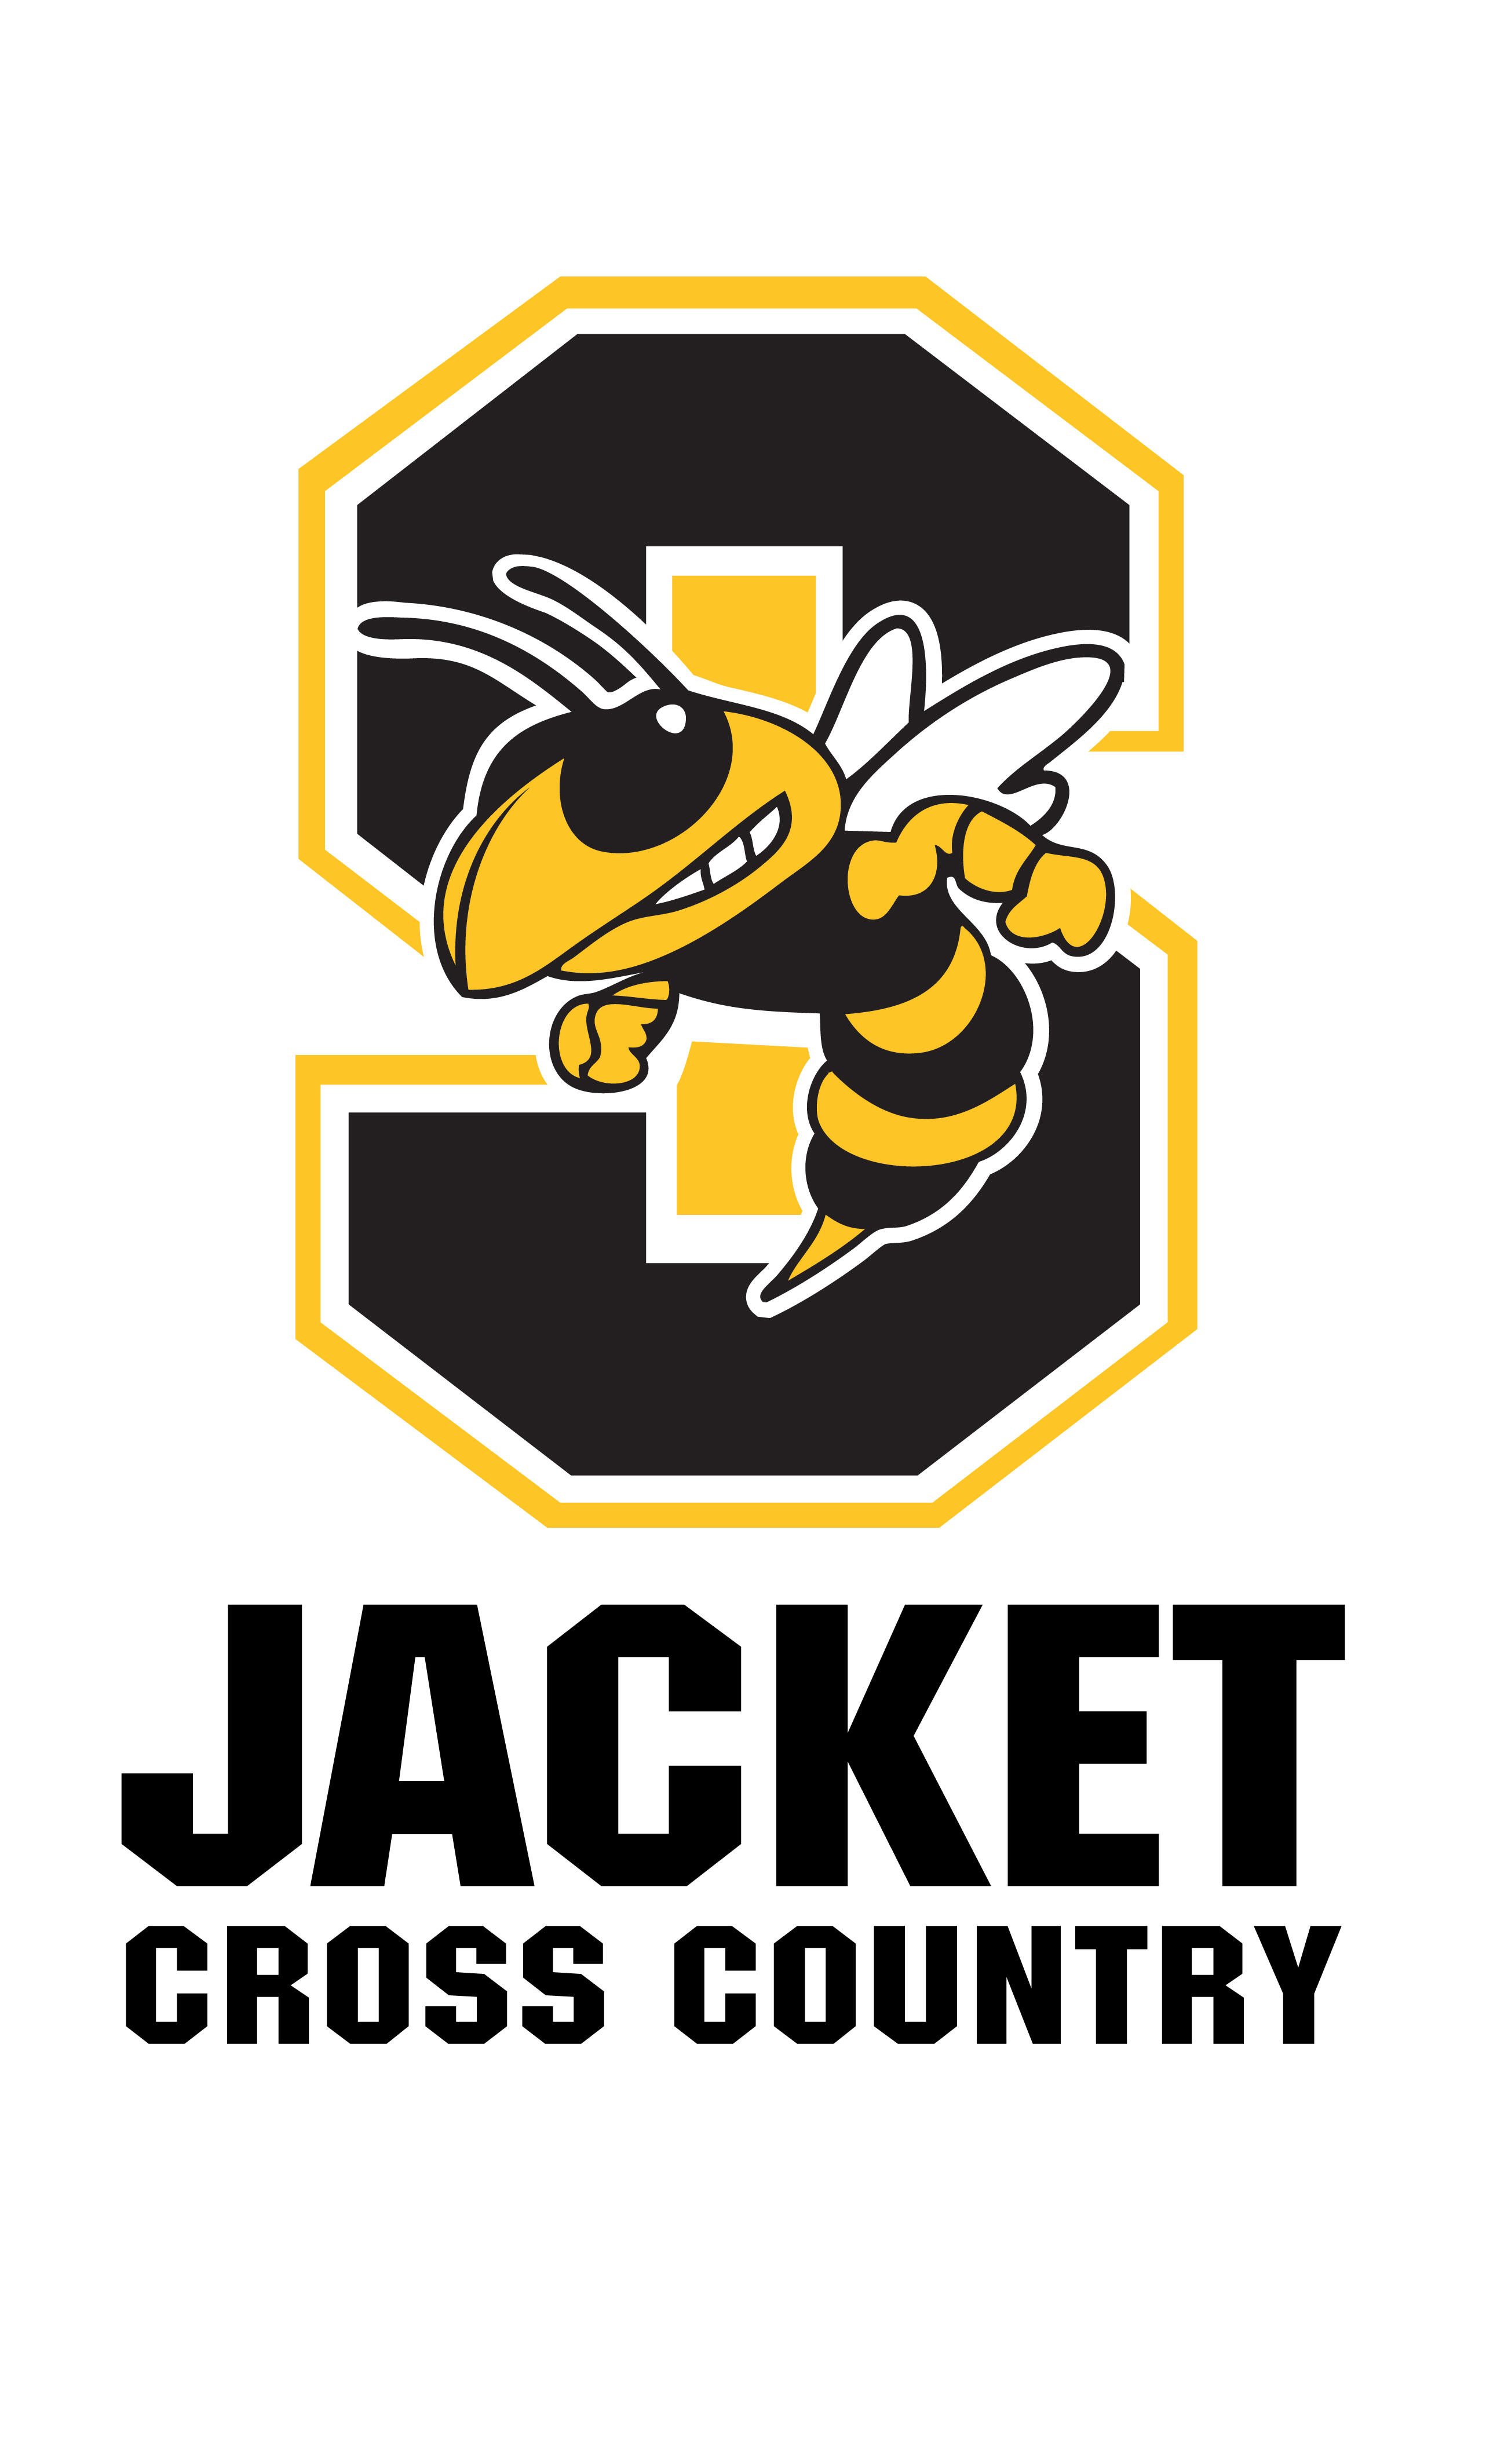 Jacket Cross Country